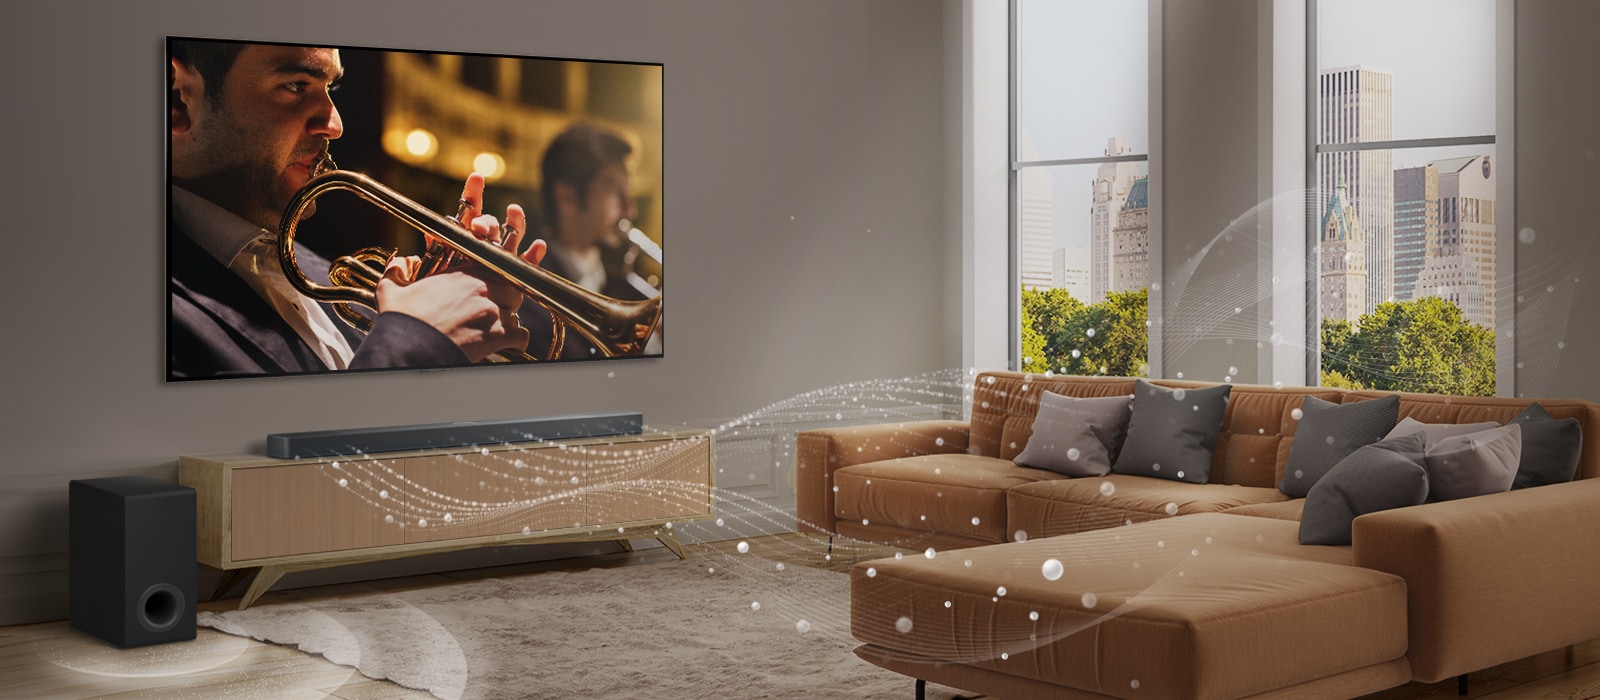 An LG Soundbar, LG TV, and subwoofer are in a modern city apartment. The LG Soundbar emits three branches of soundwaves, made of white droplets that float along the bottom of the floor. Next to the Soundbar is a subwoofer, creating a sound effect from the bottom. 